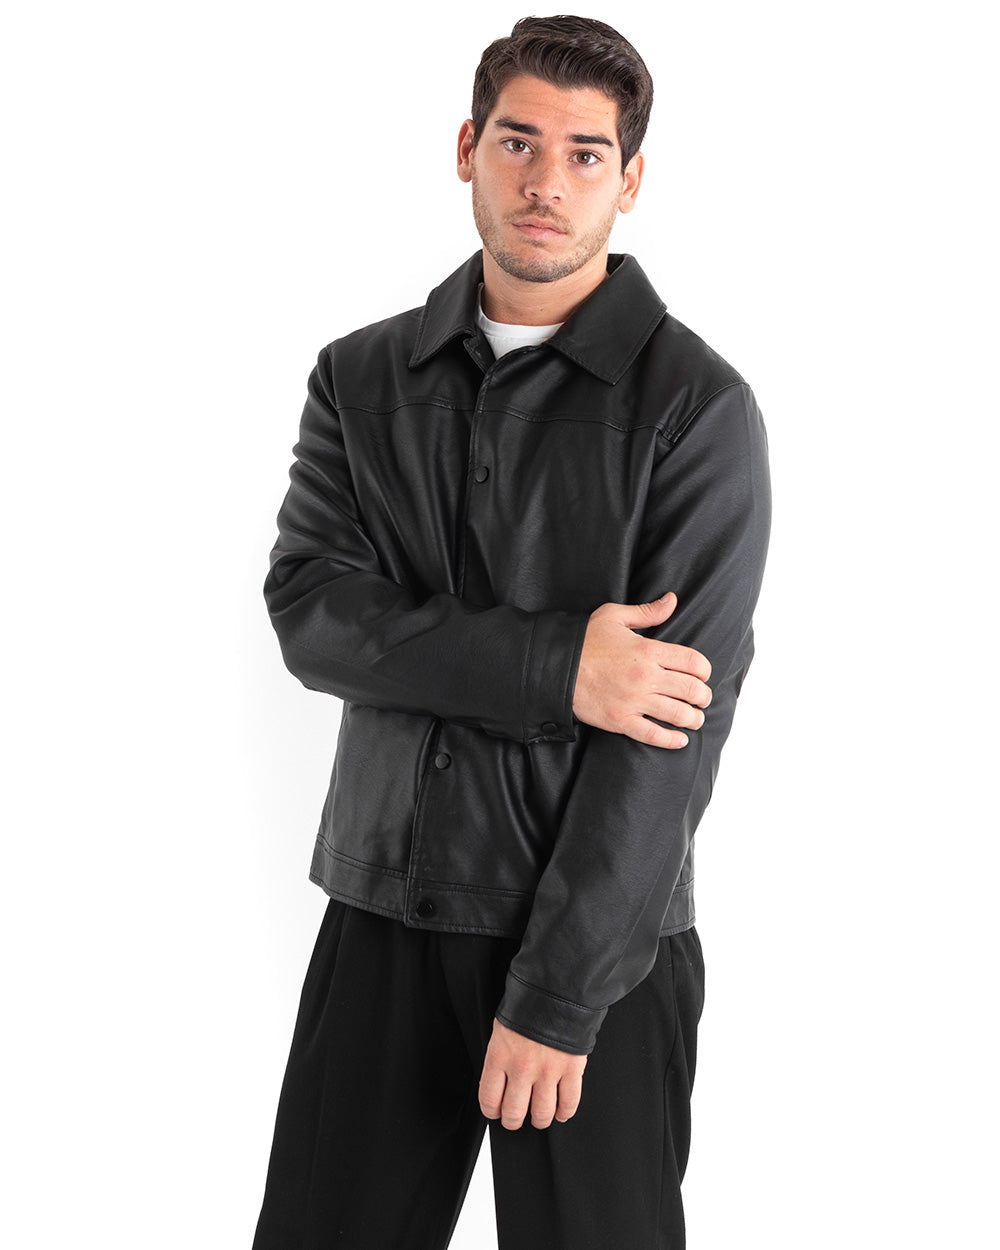 Men's Jacket Shirt Solid Black Faux Leather Long Sleeve GIOSAL